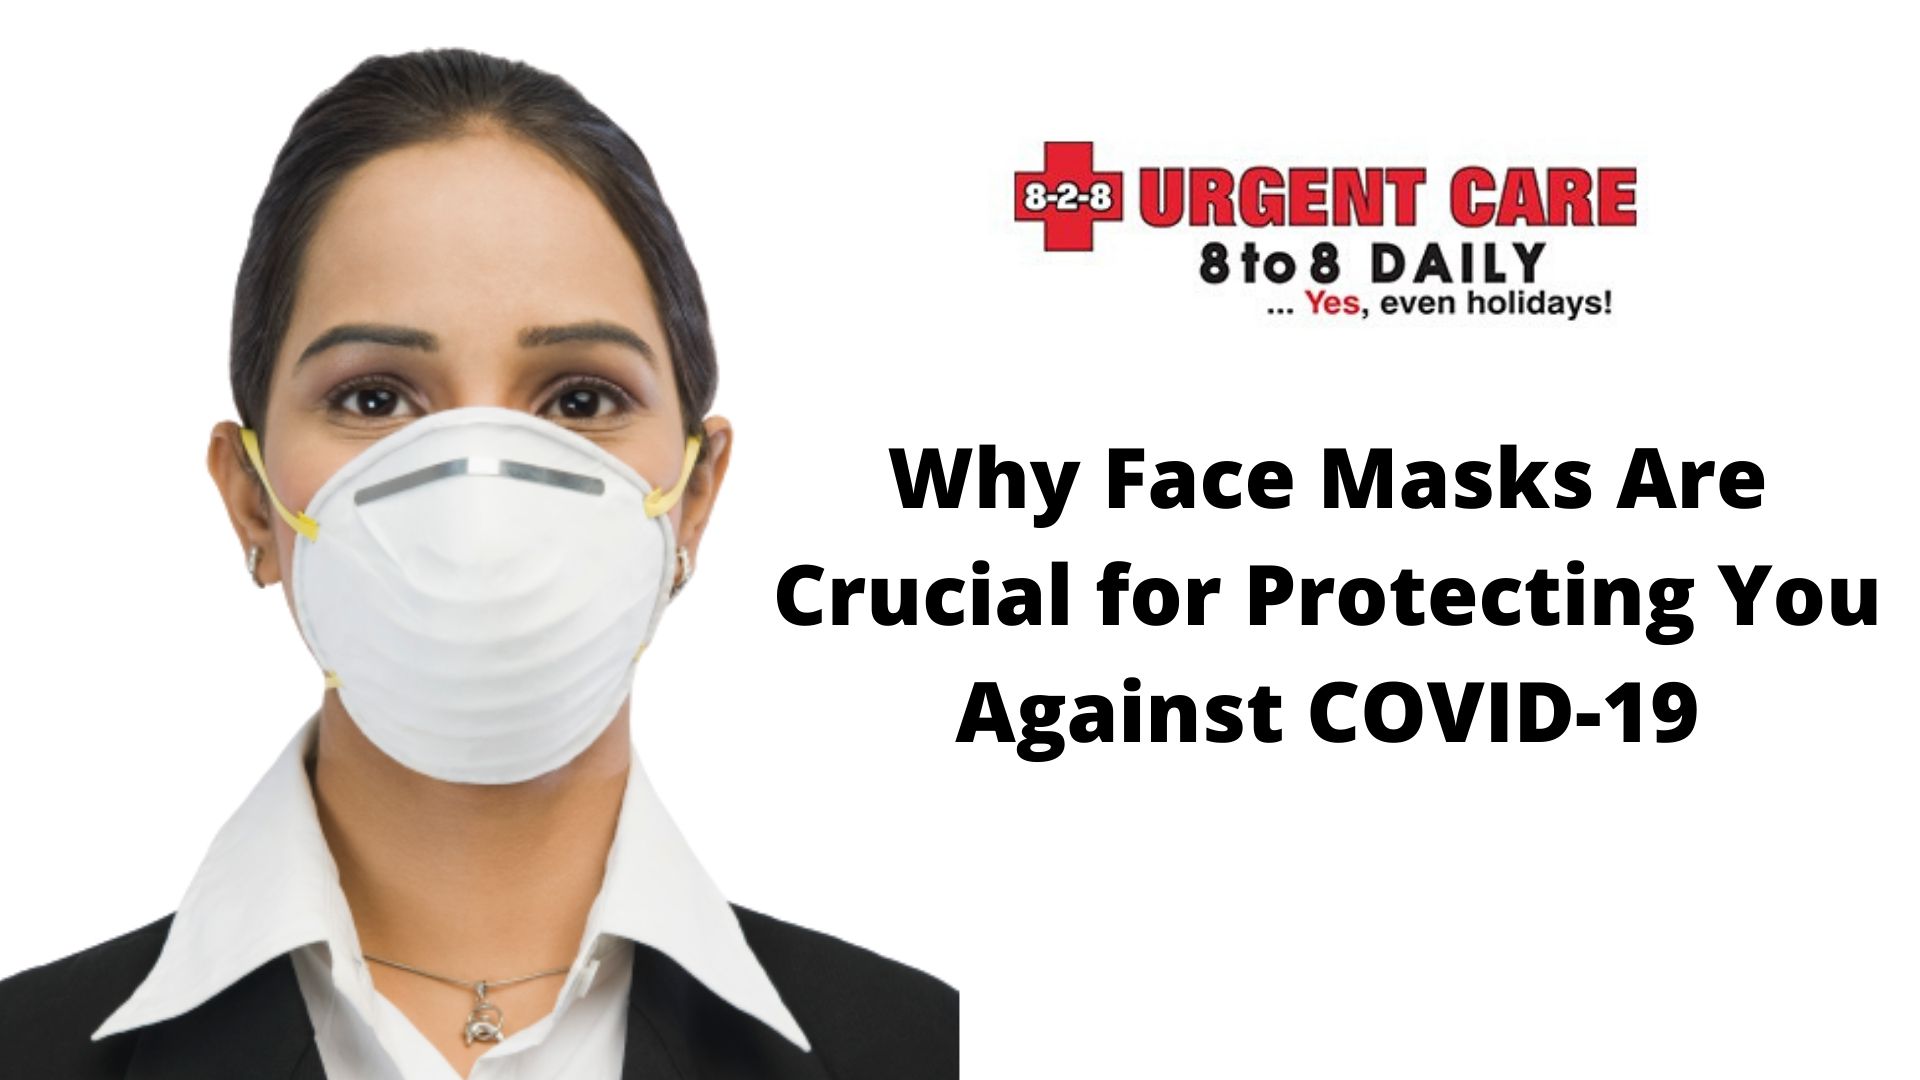 Why Face Masks Are Crucial for Protecting You Against COVID-19